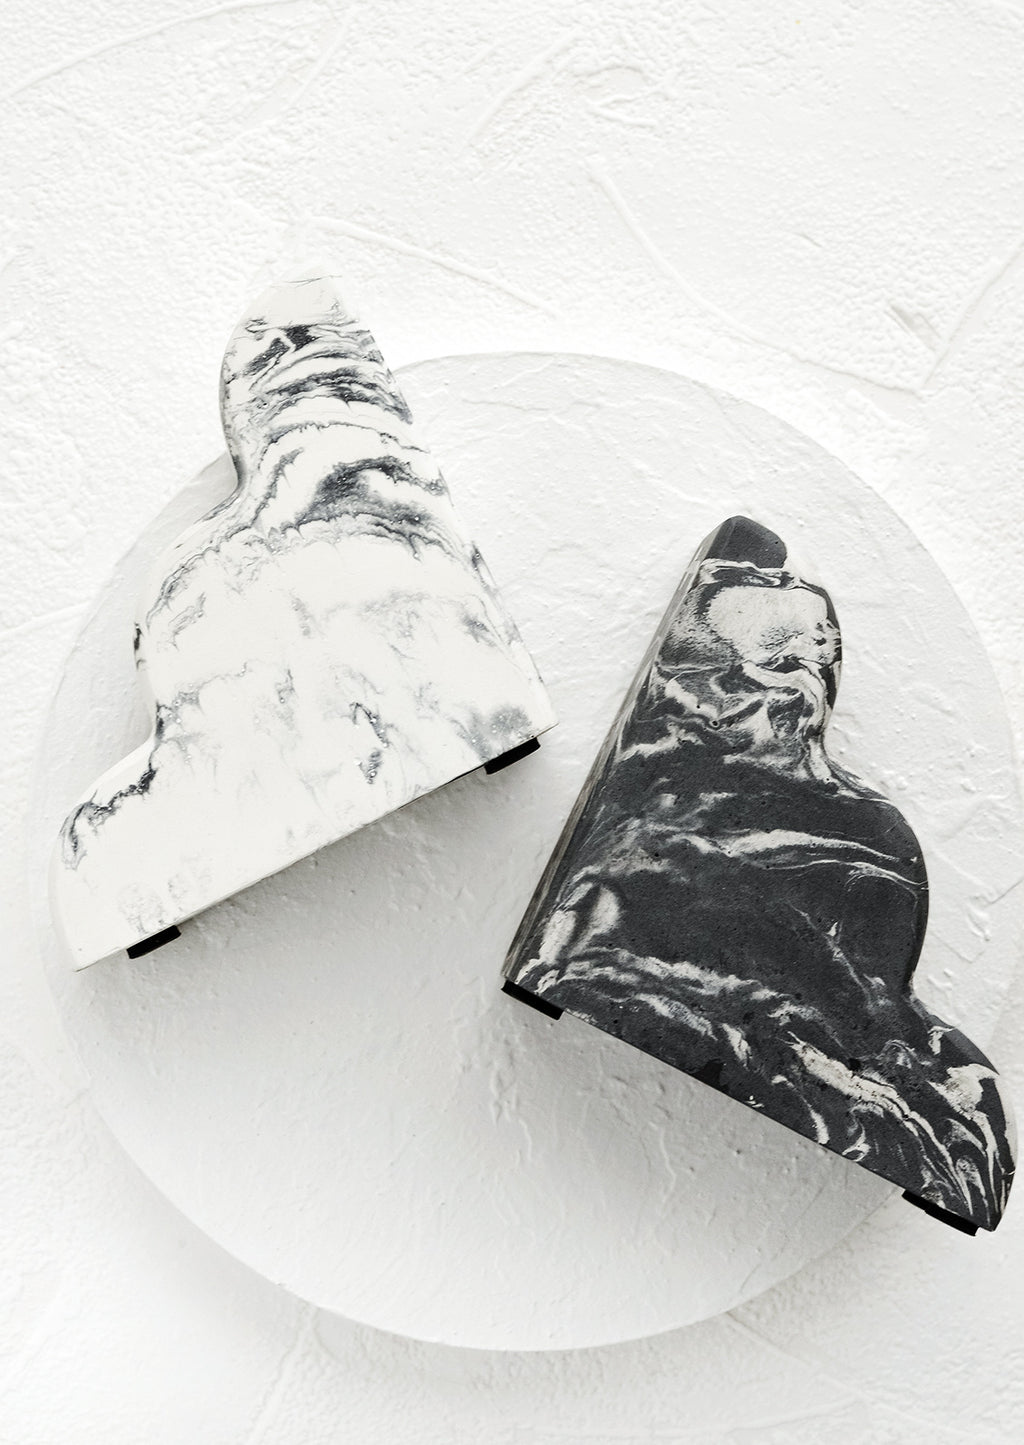 1: A pair of bookends in half-cloud shape in mis-matched, black and white marbleized pattern.